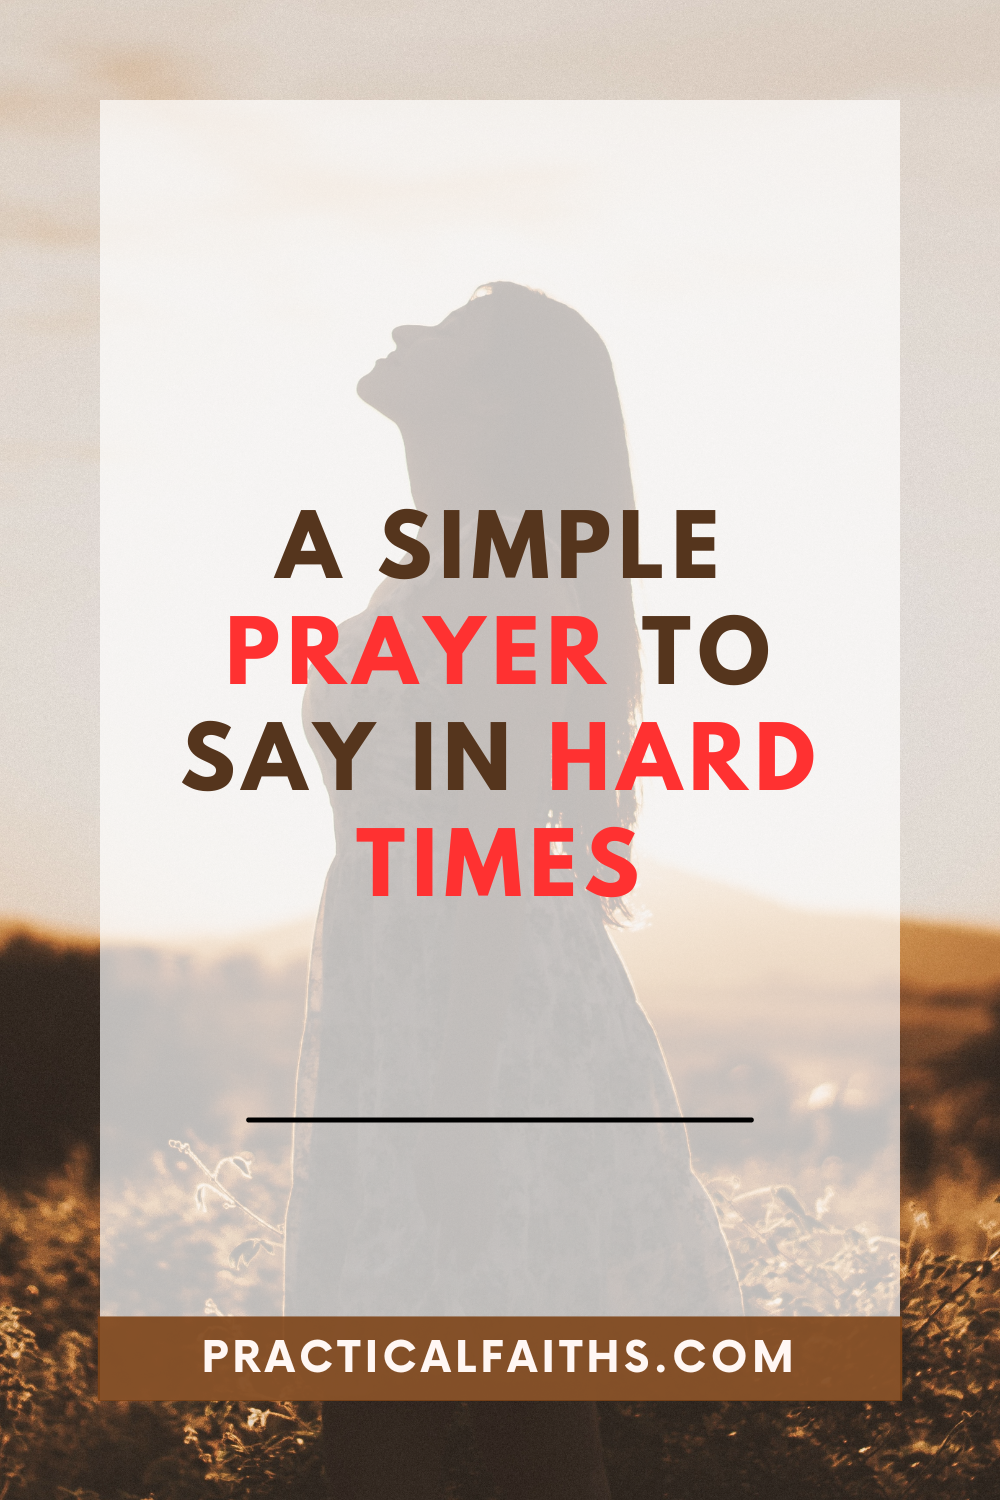 A Simple Prayer to Say in Hard Times